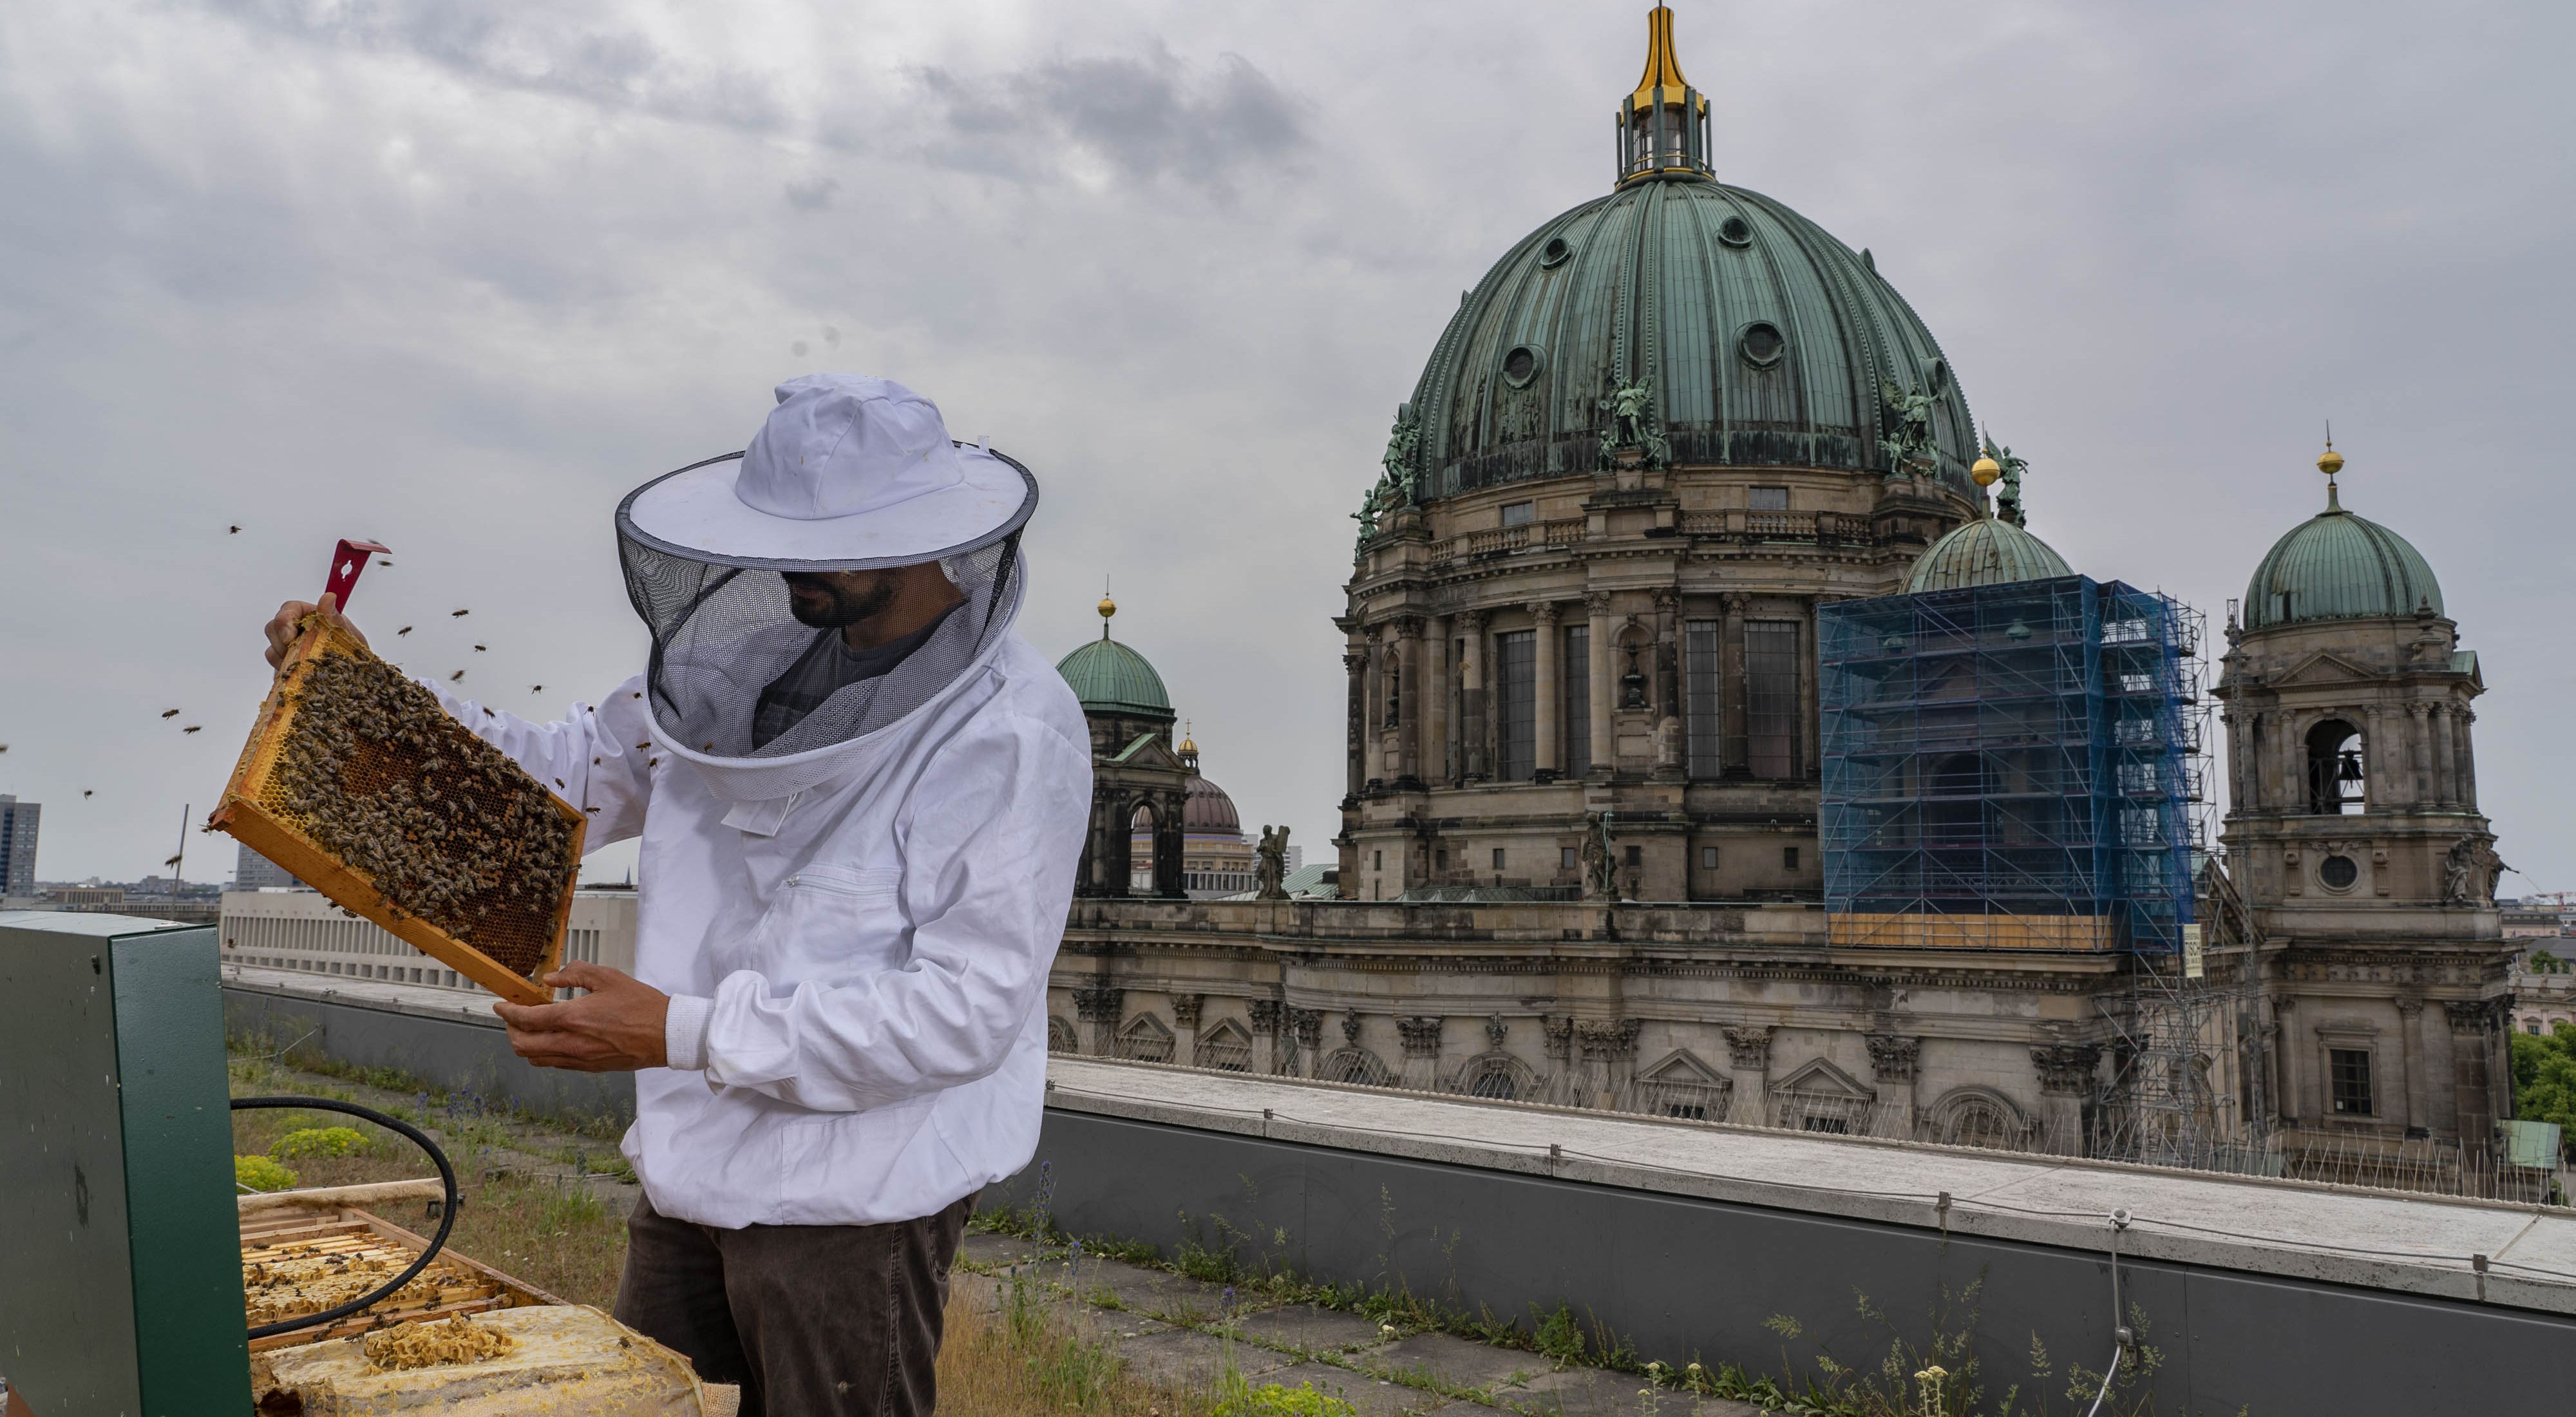 a beekeeper in a suit holds a tray of bees on a rooftop with old architecture in the background